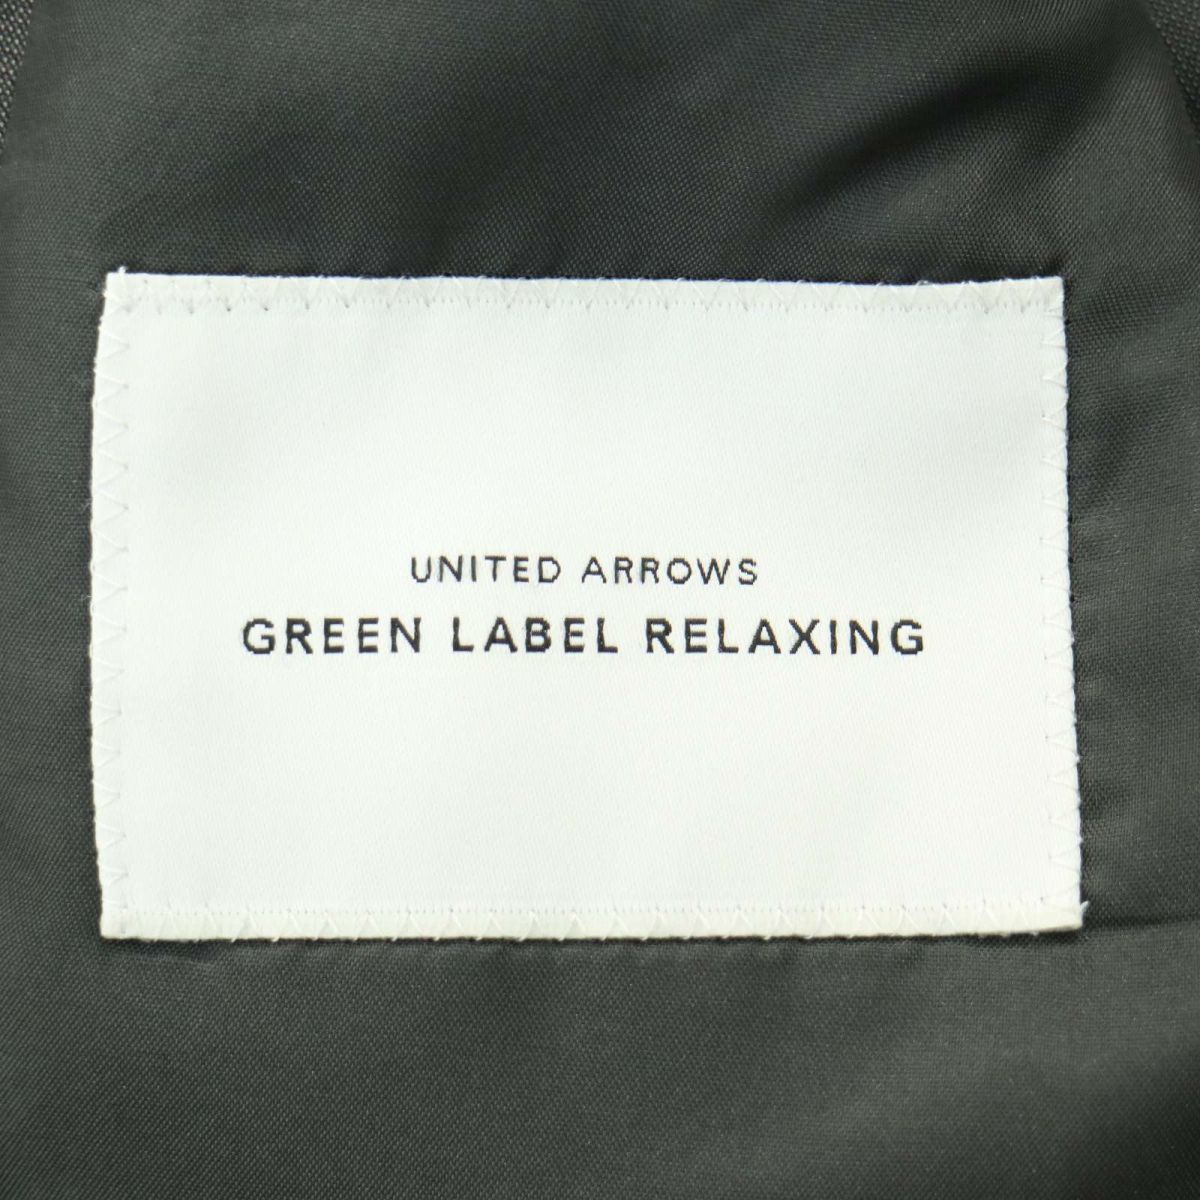 GREEN LABEL RELAXING United Arrows spring summer unlined in the back * silk silk . tailored jacket Sz.44 men's ash bijikajiA3T08667_7#M